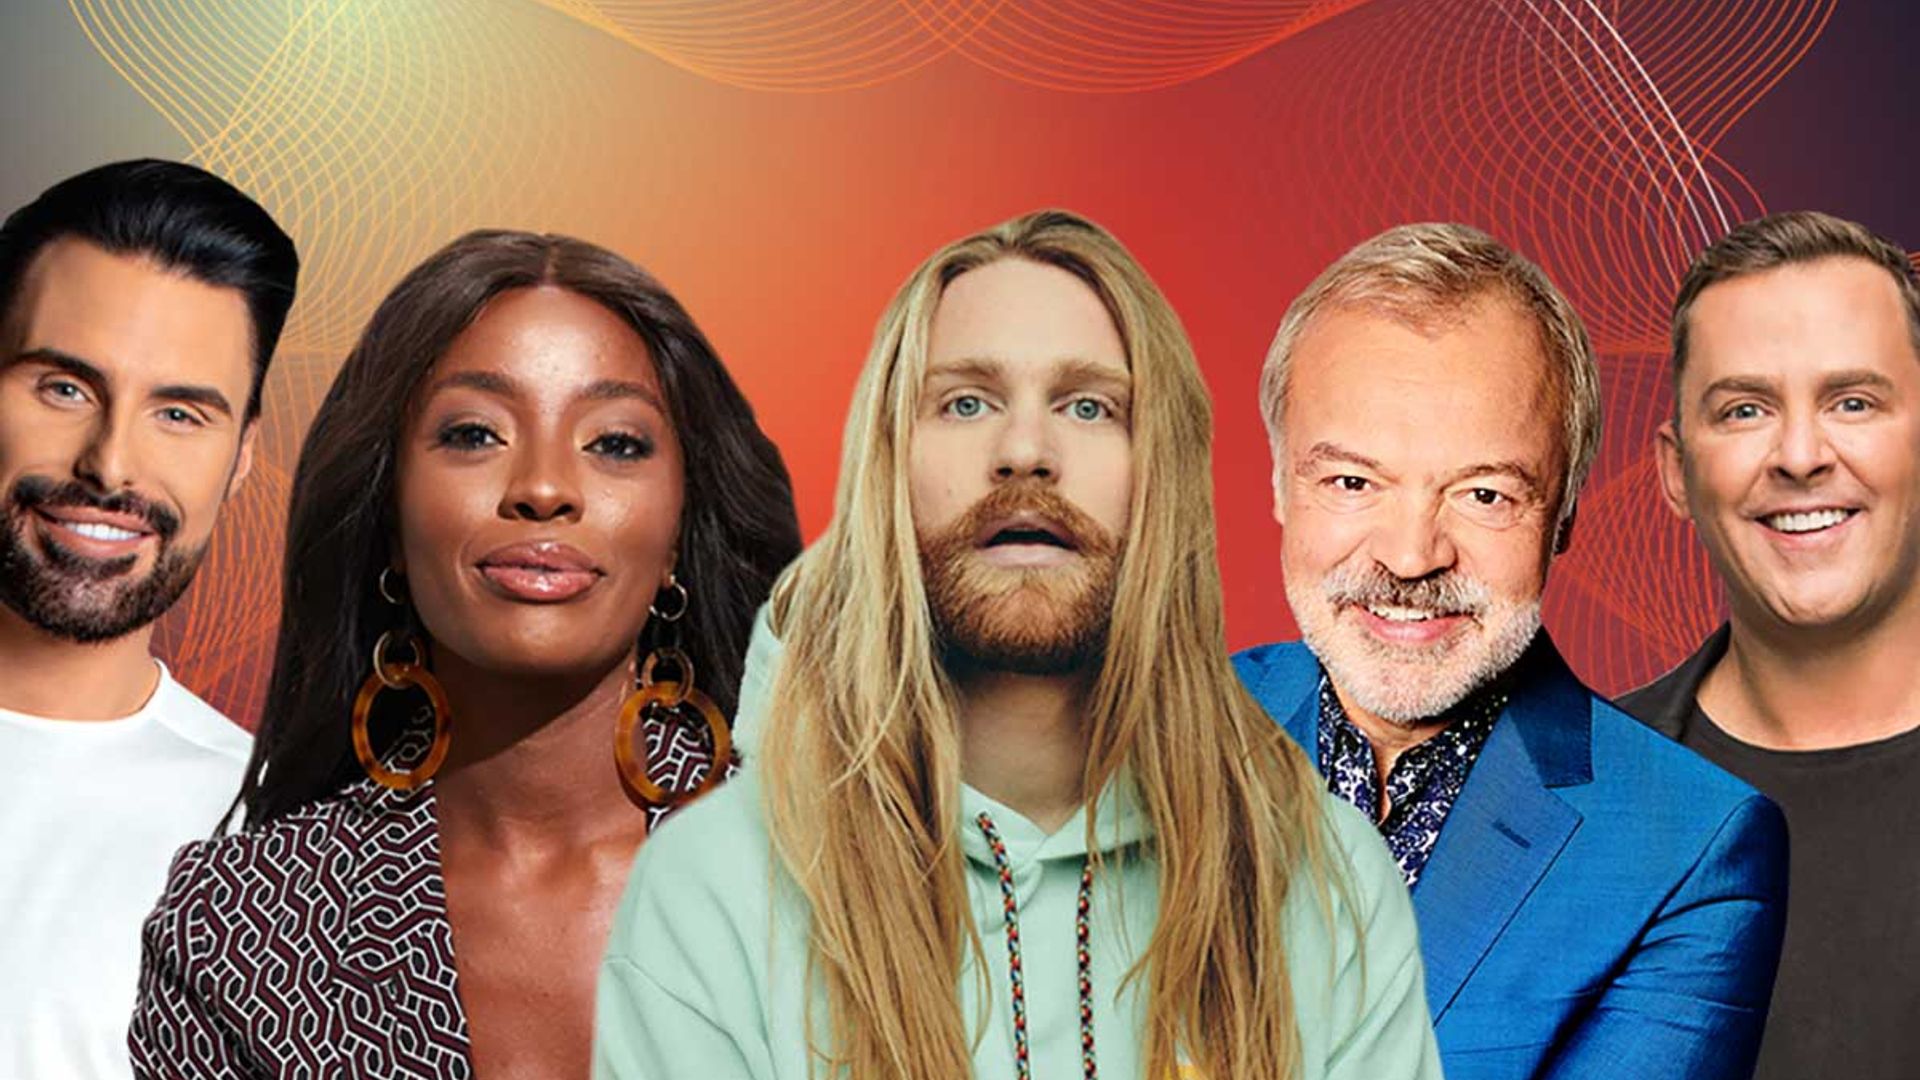 Eurovision Song Contest 2022: hosts, voting, air time and how to watch